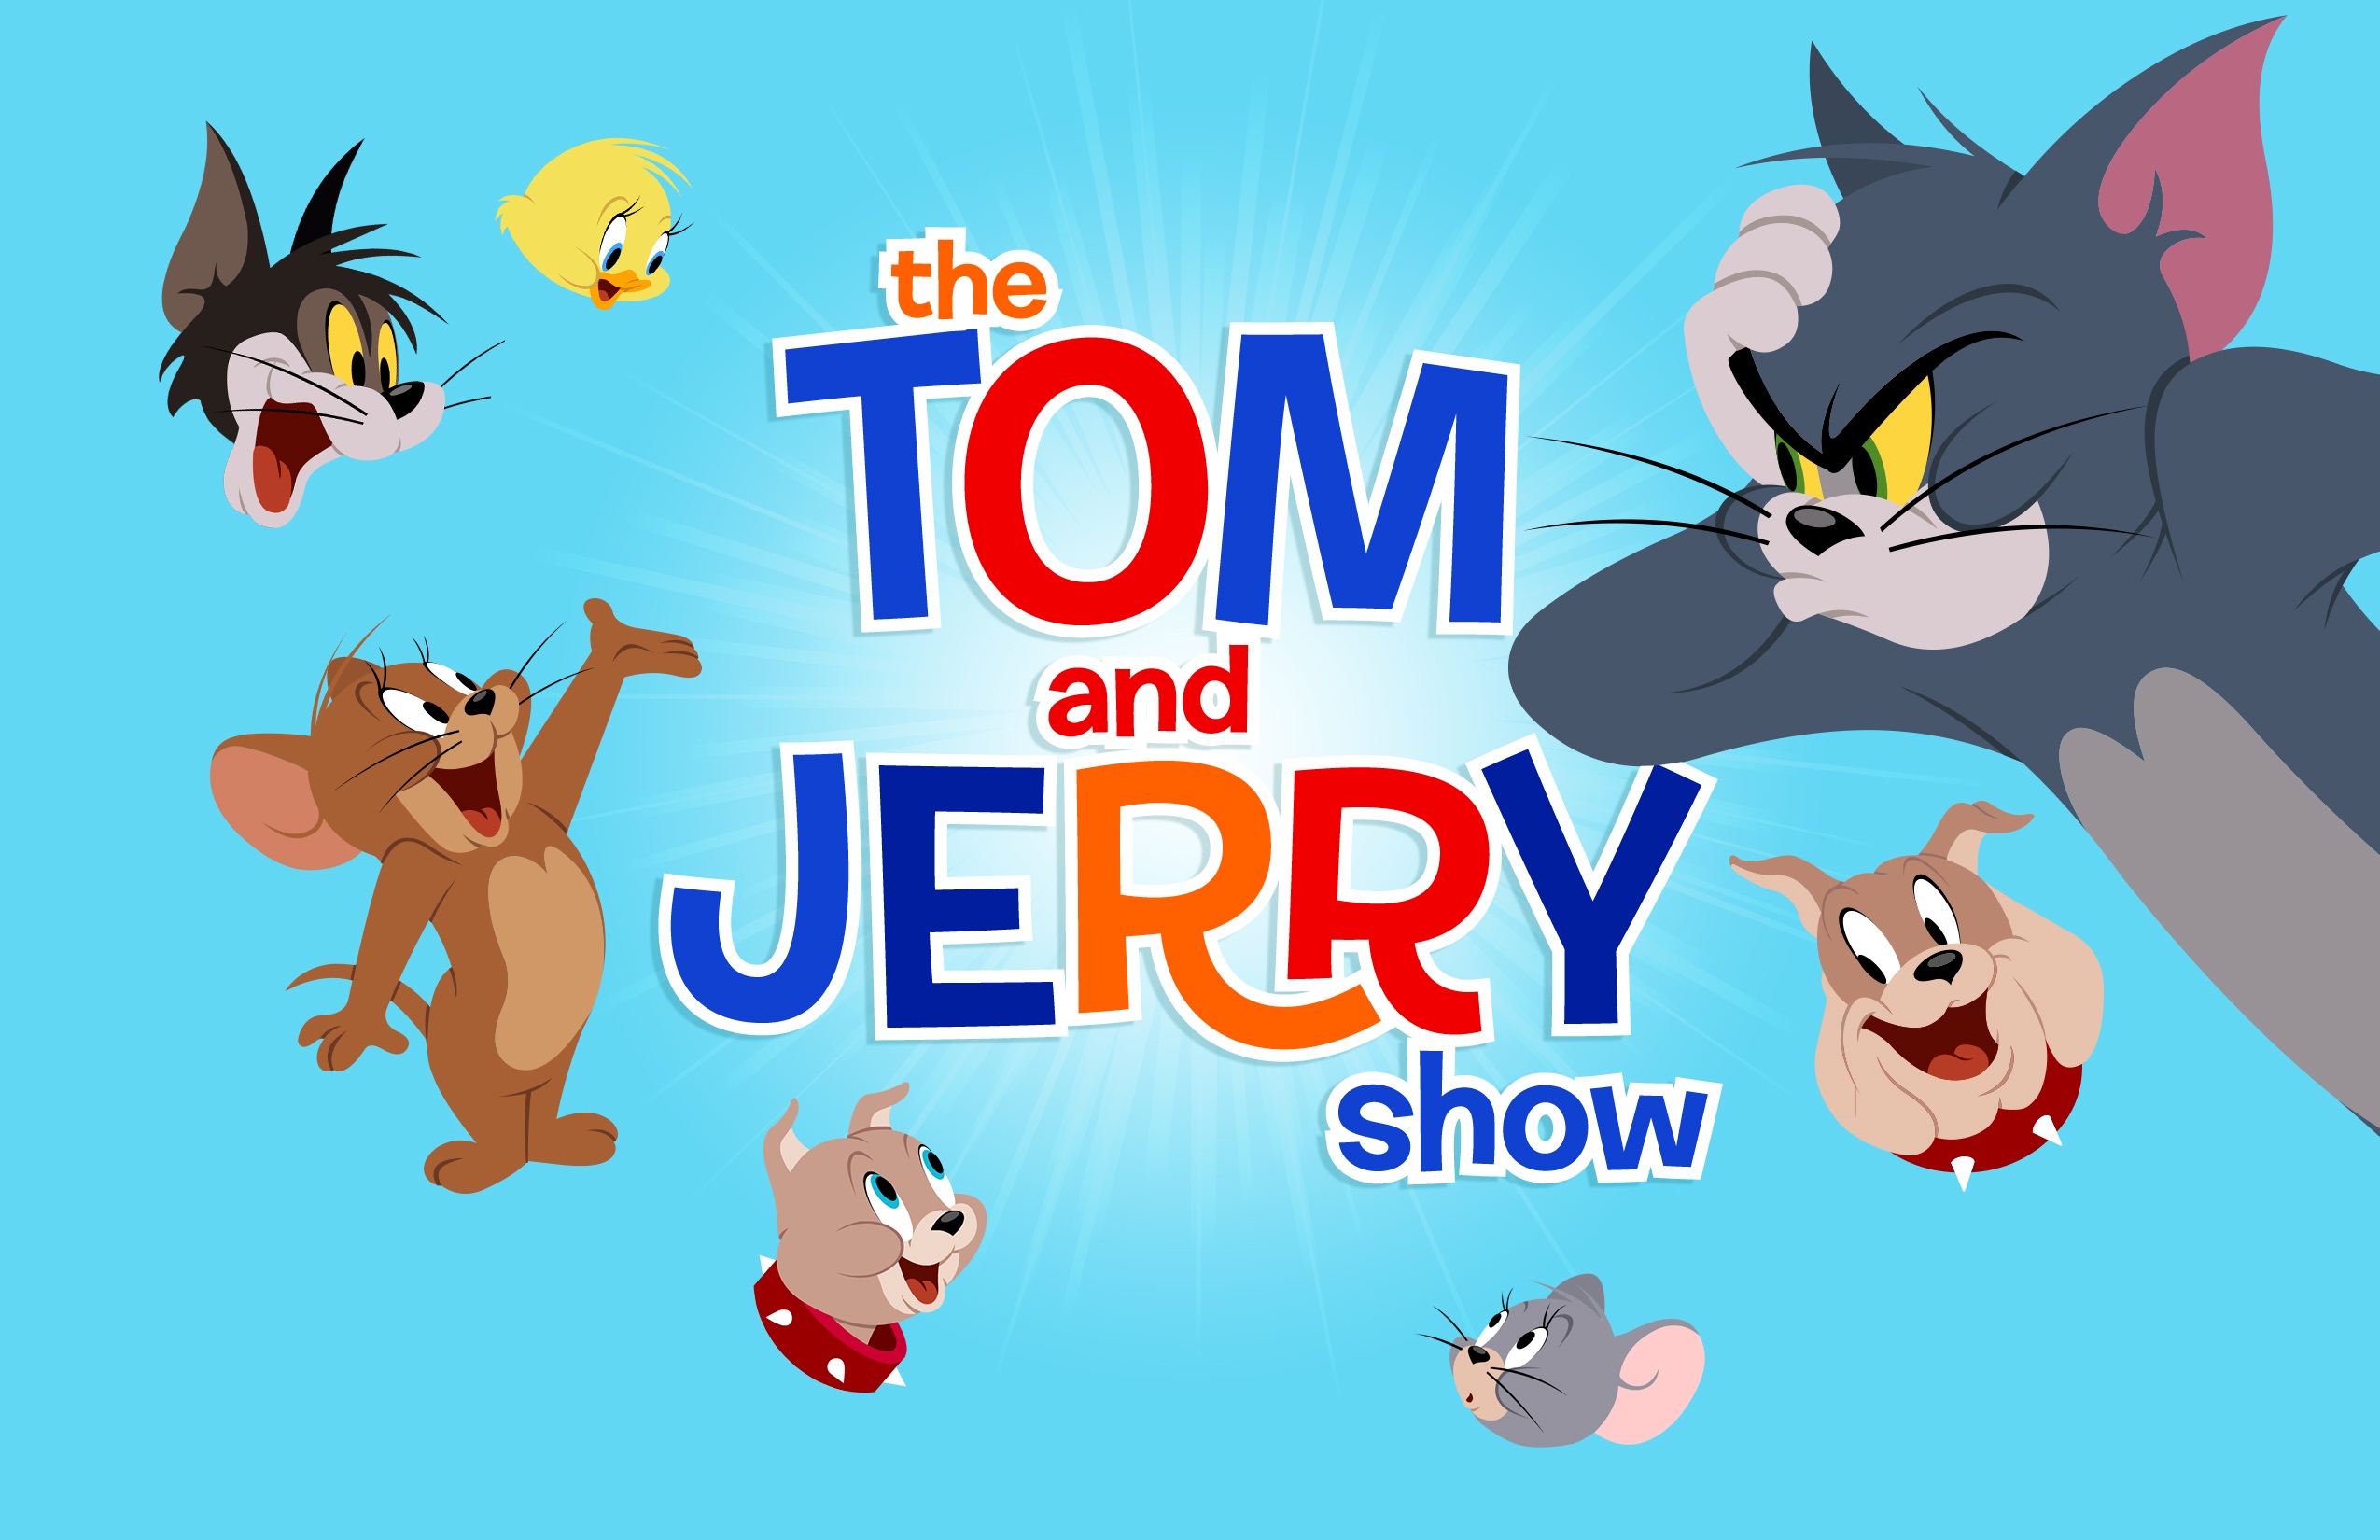 The Tom Jerry Show Wallpaper